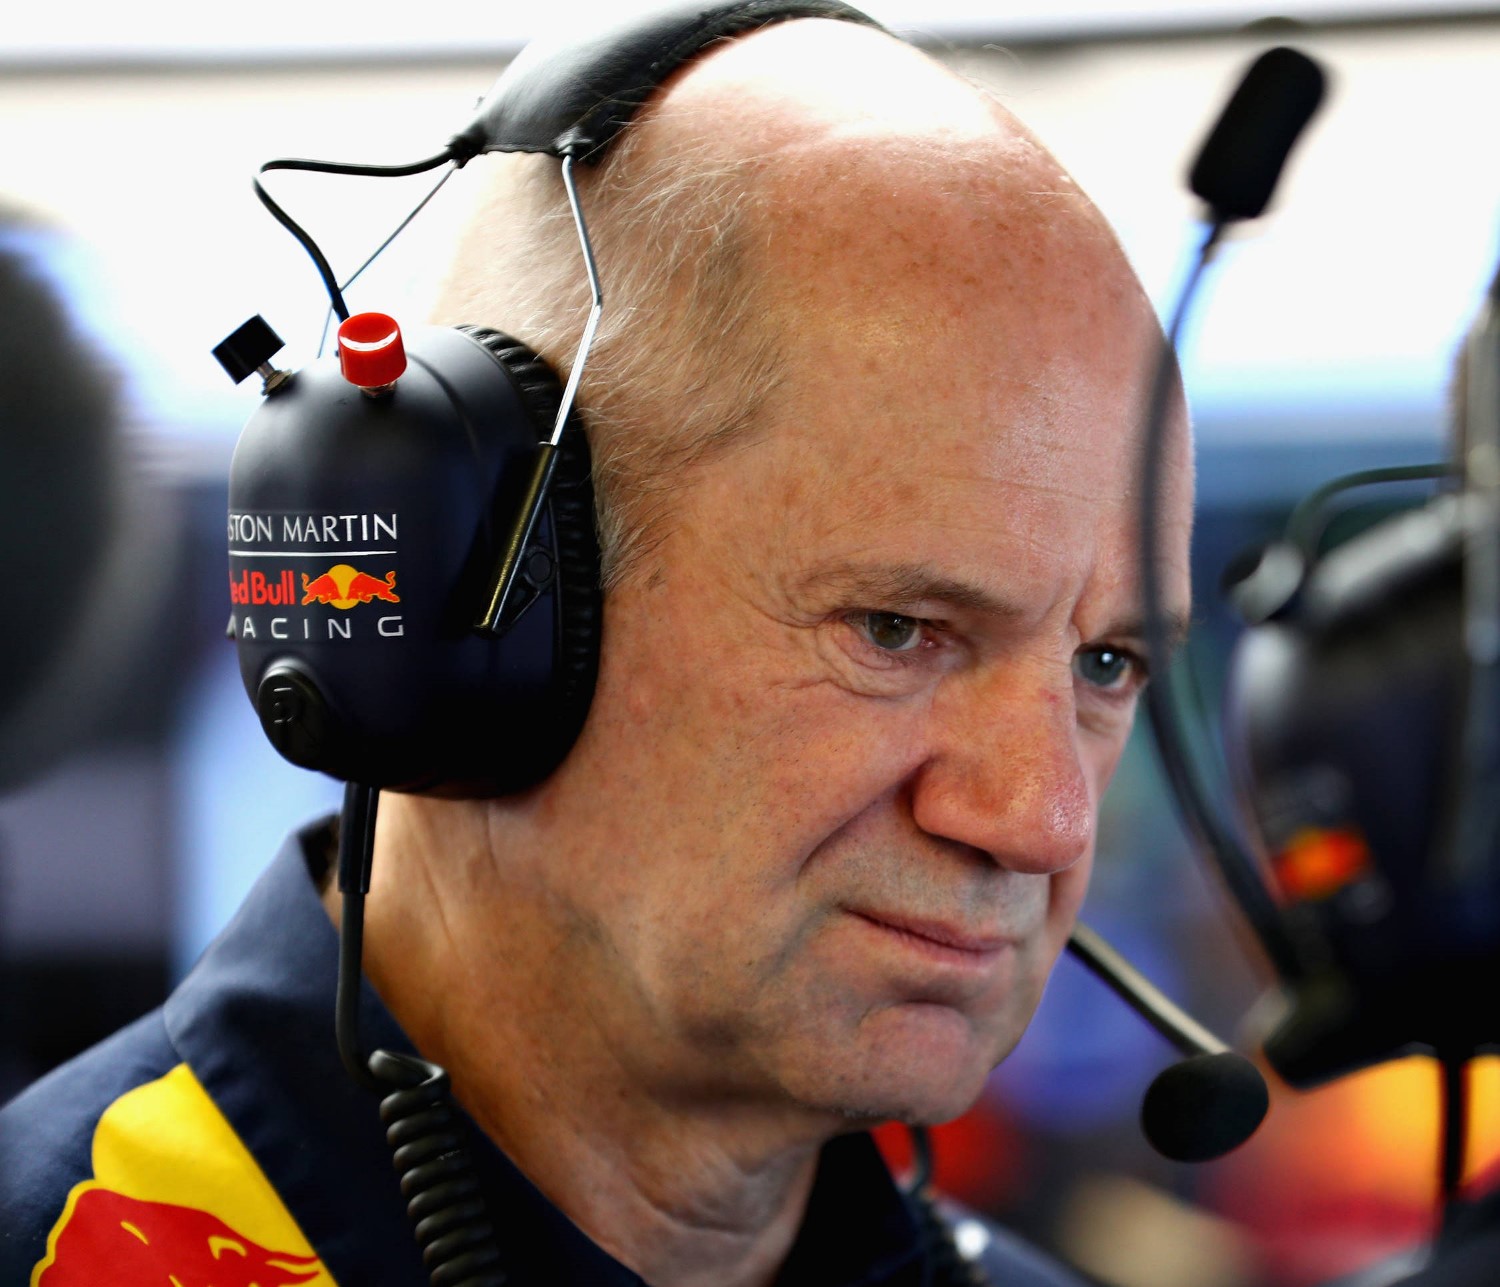 The real shocker will be if the rumor of Adrian Newey's move to Renault comes true